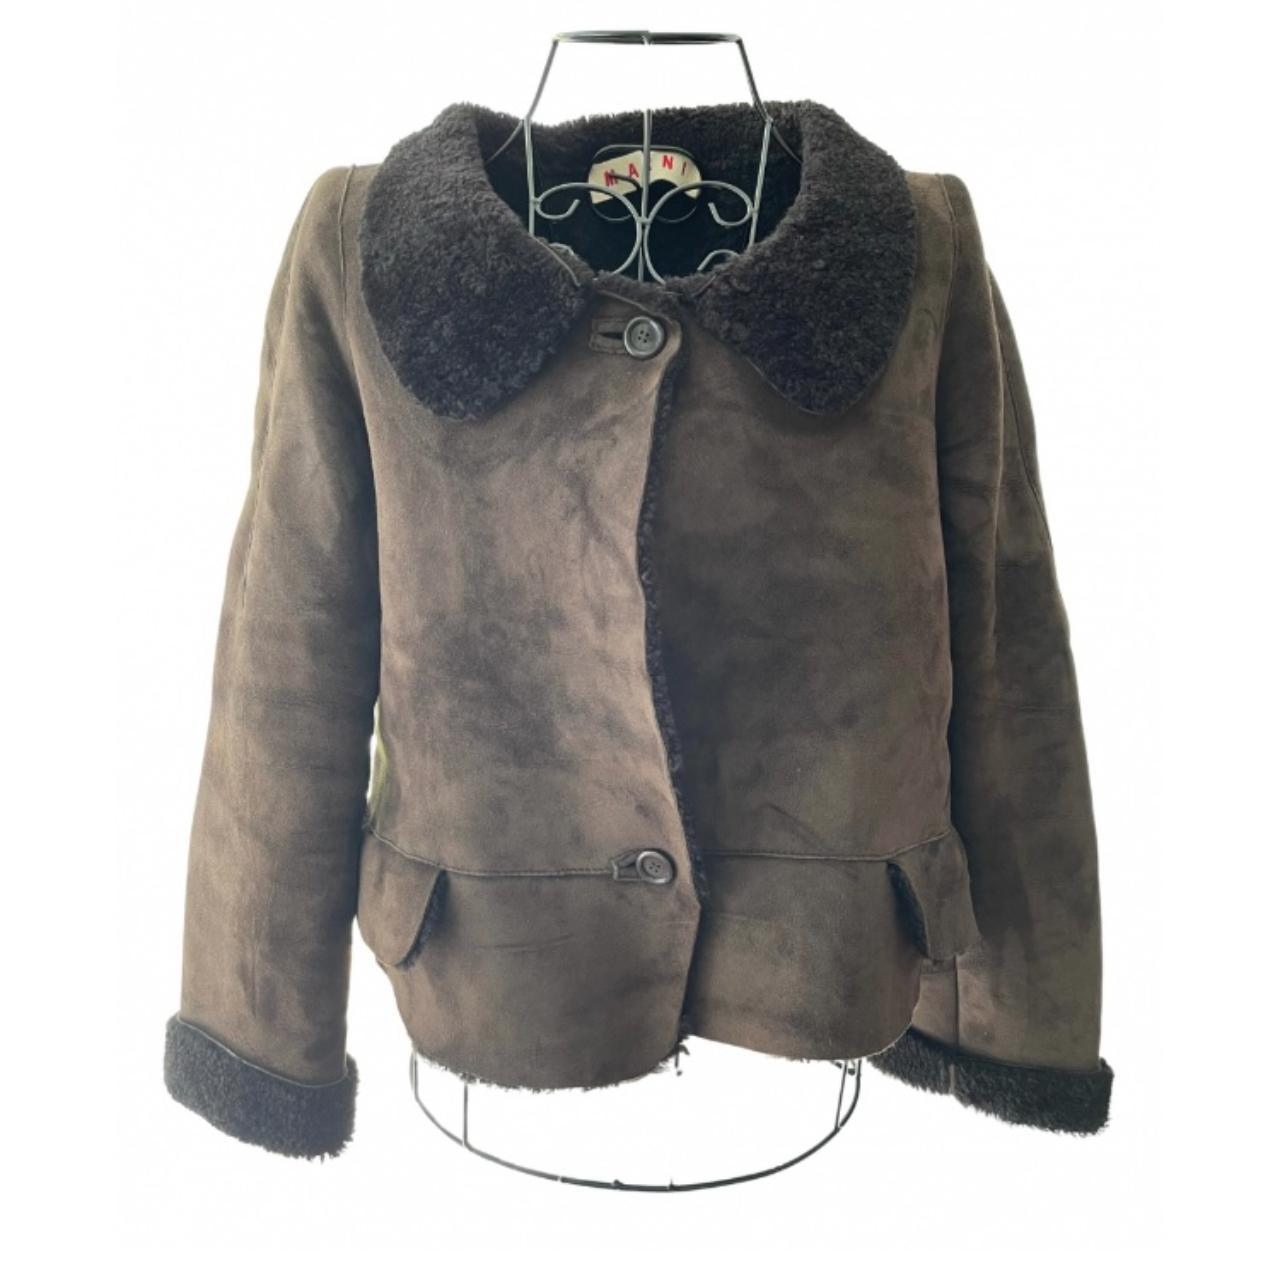 Product Image 1 - Chic MARNI suede leather jacket.